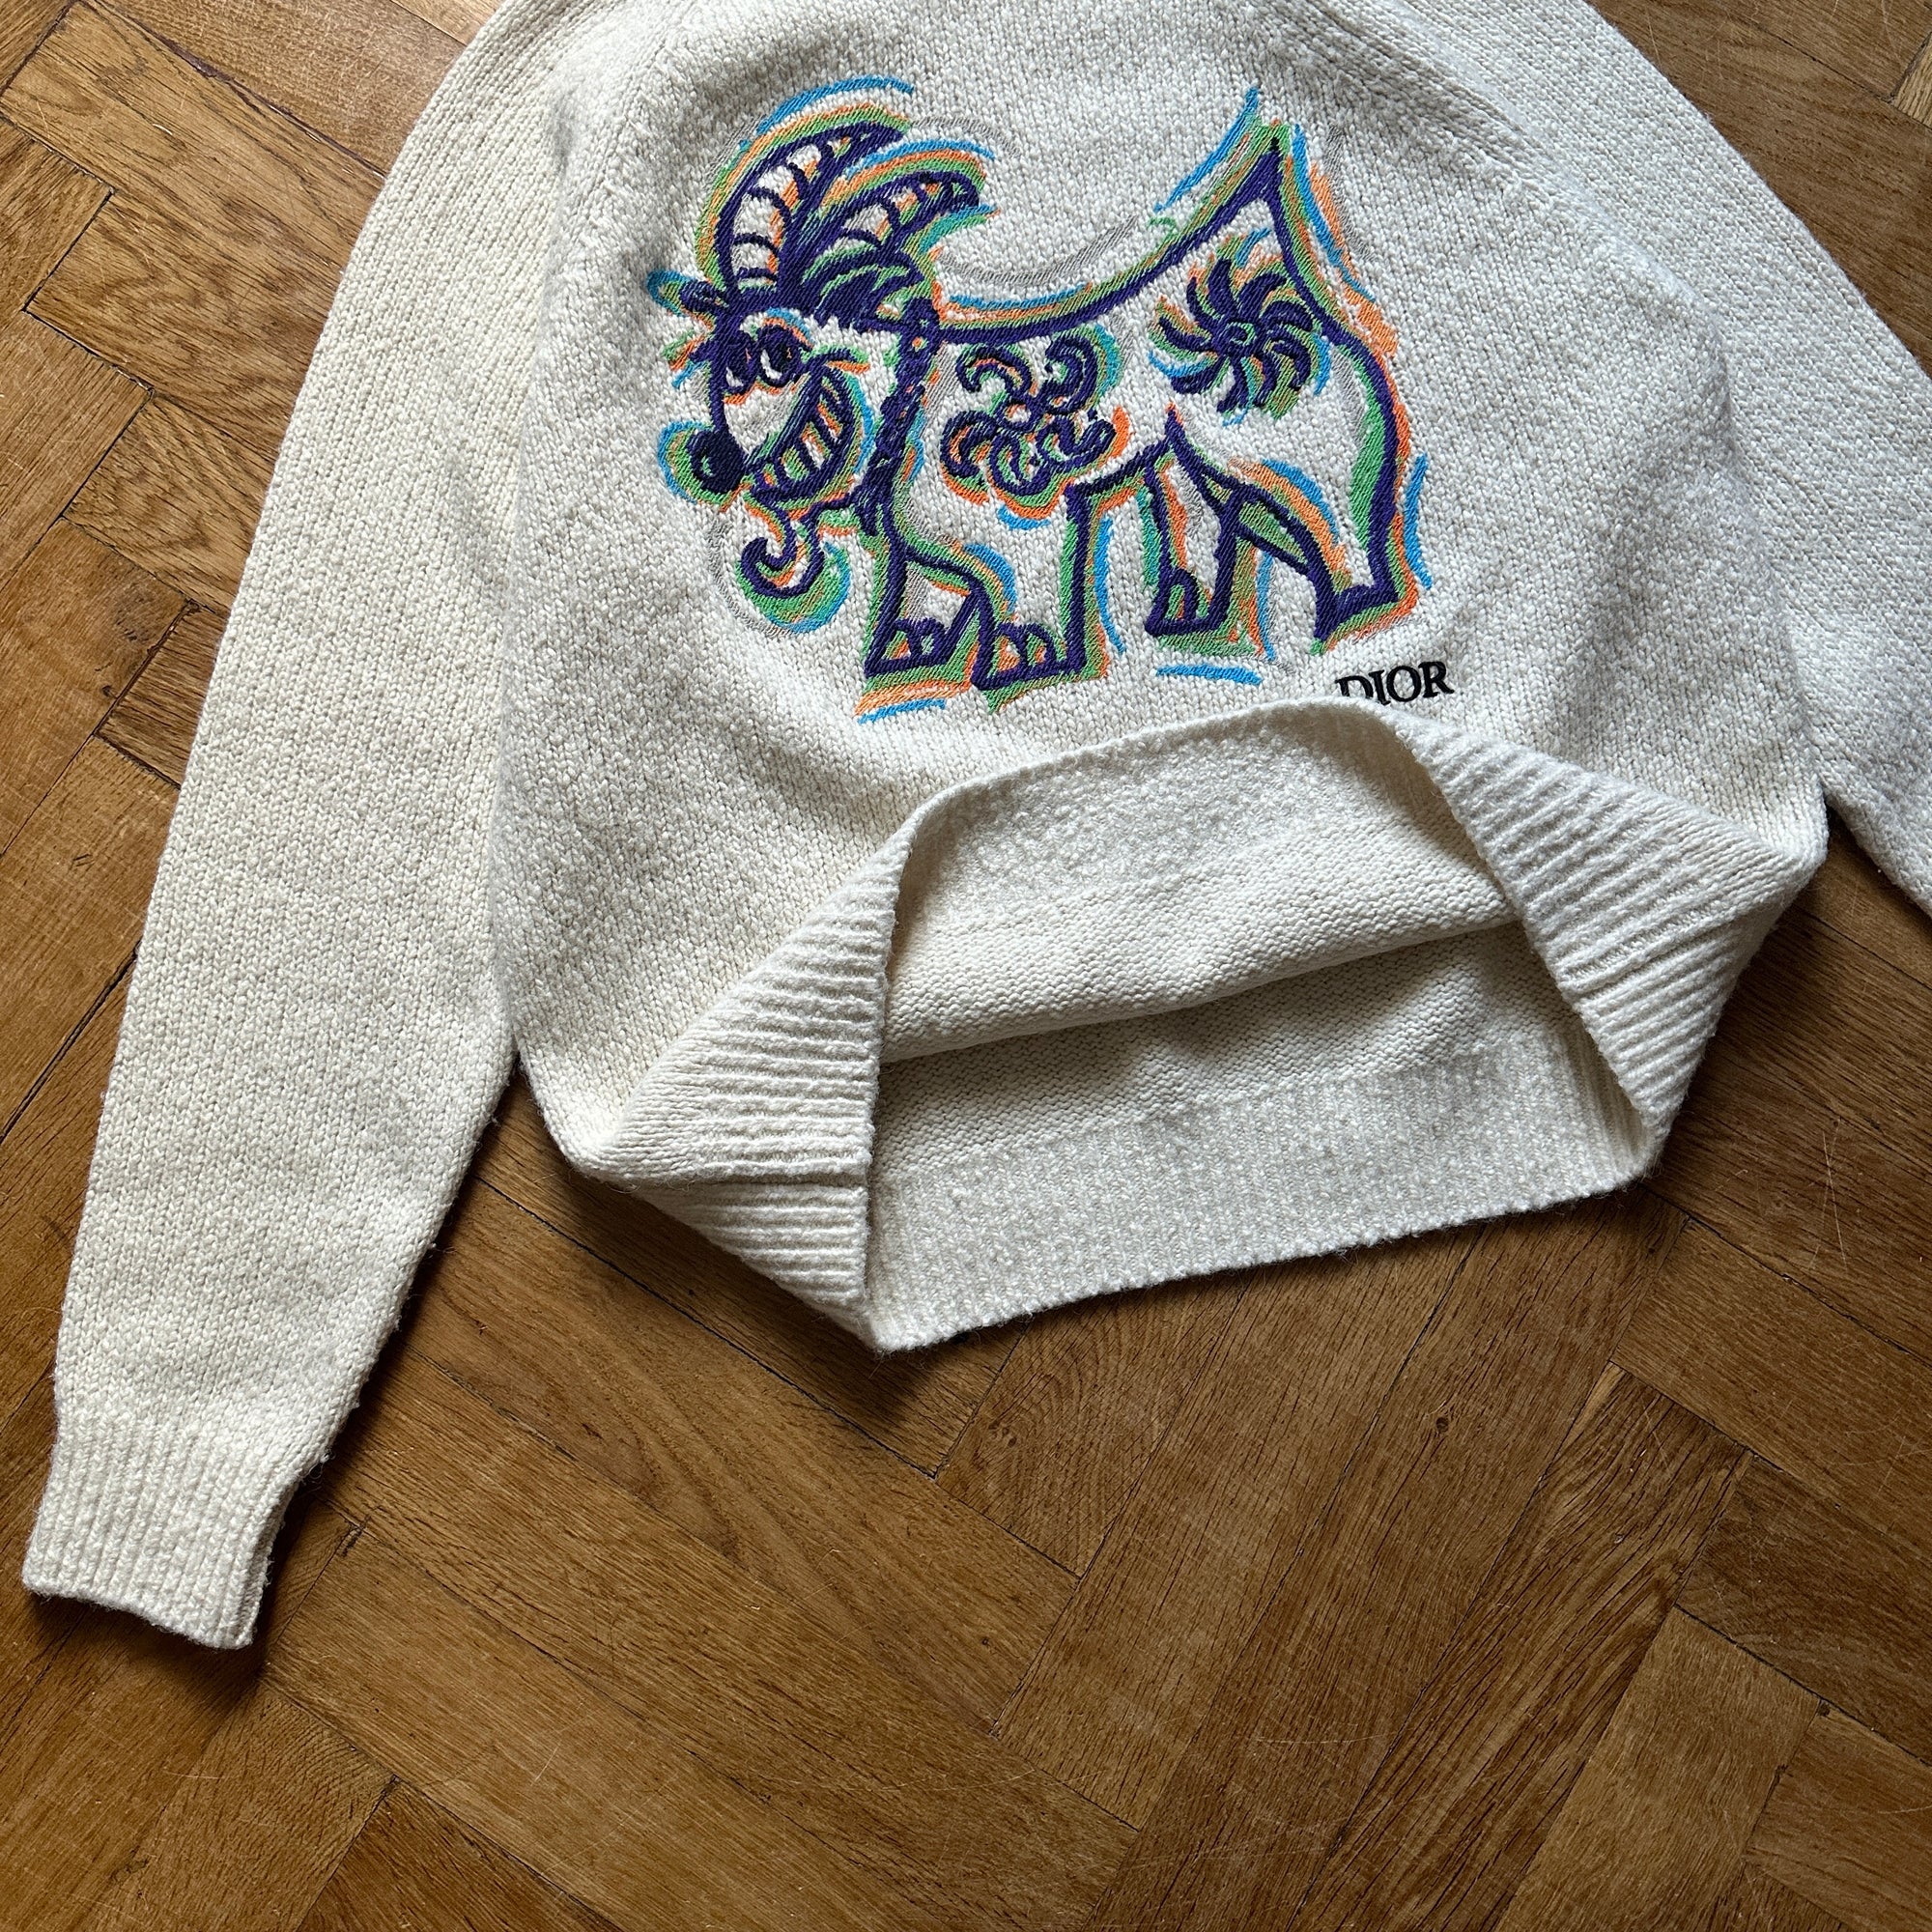 Dior Kenny Scharf FW21 Goat Embroidered Wool Knit Sweater